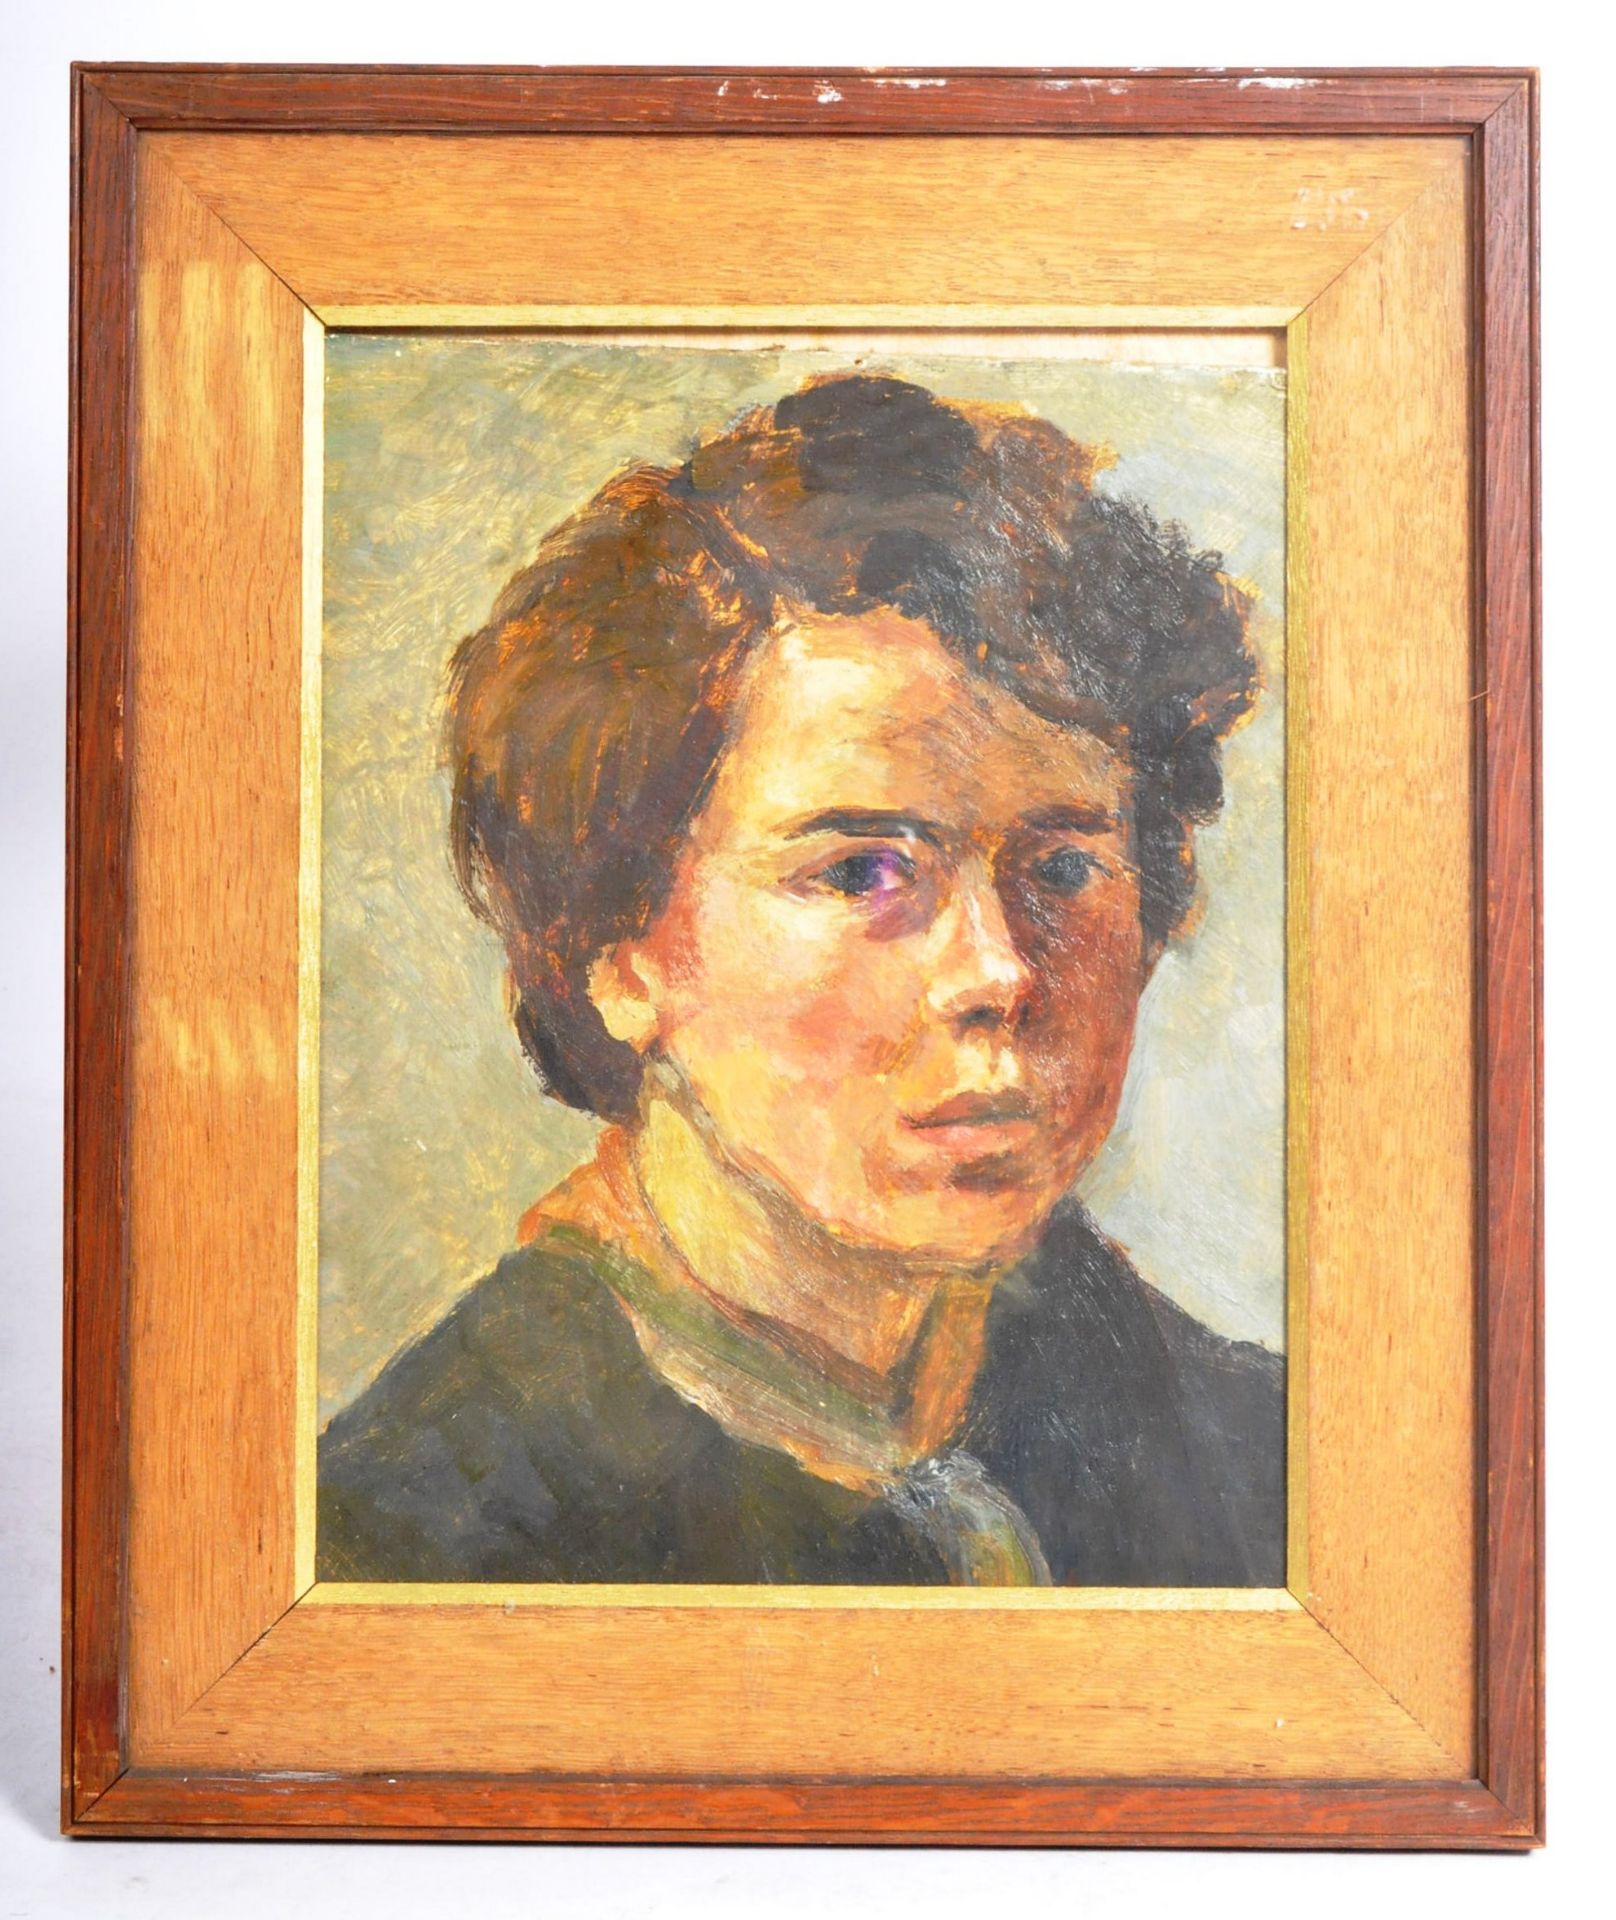 MID 20TH CENTURY OIL ON BOARD PORTRAIT PAINTING OF A YOUNG BOY